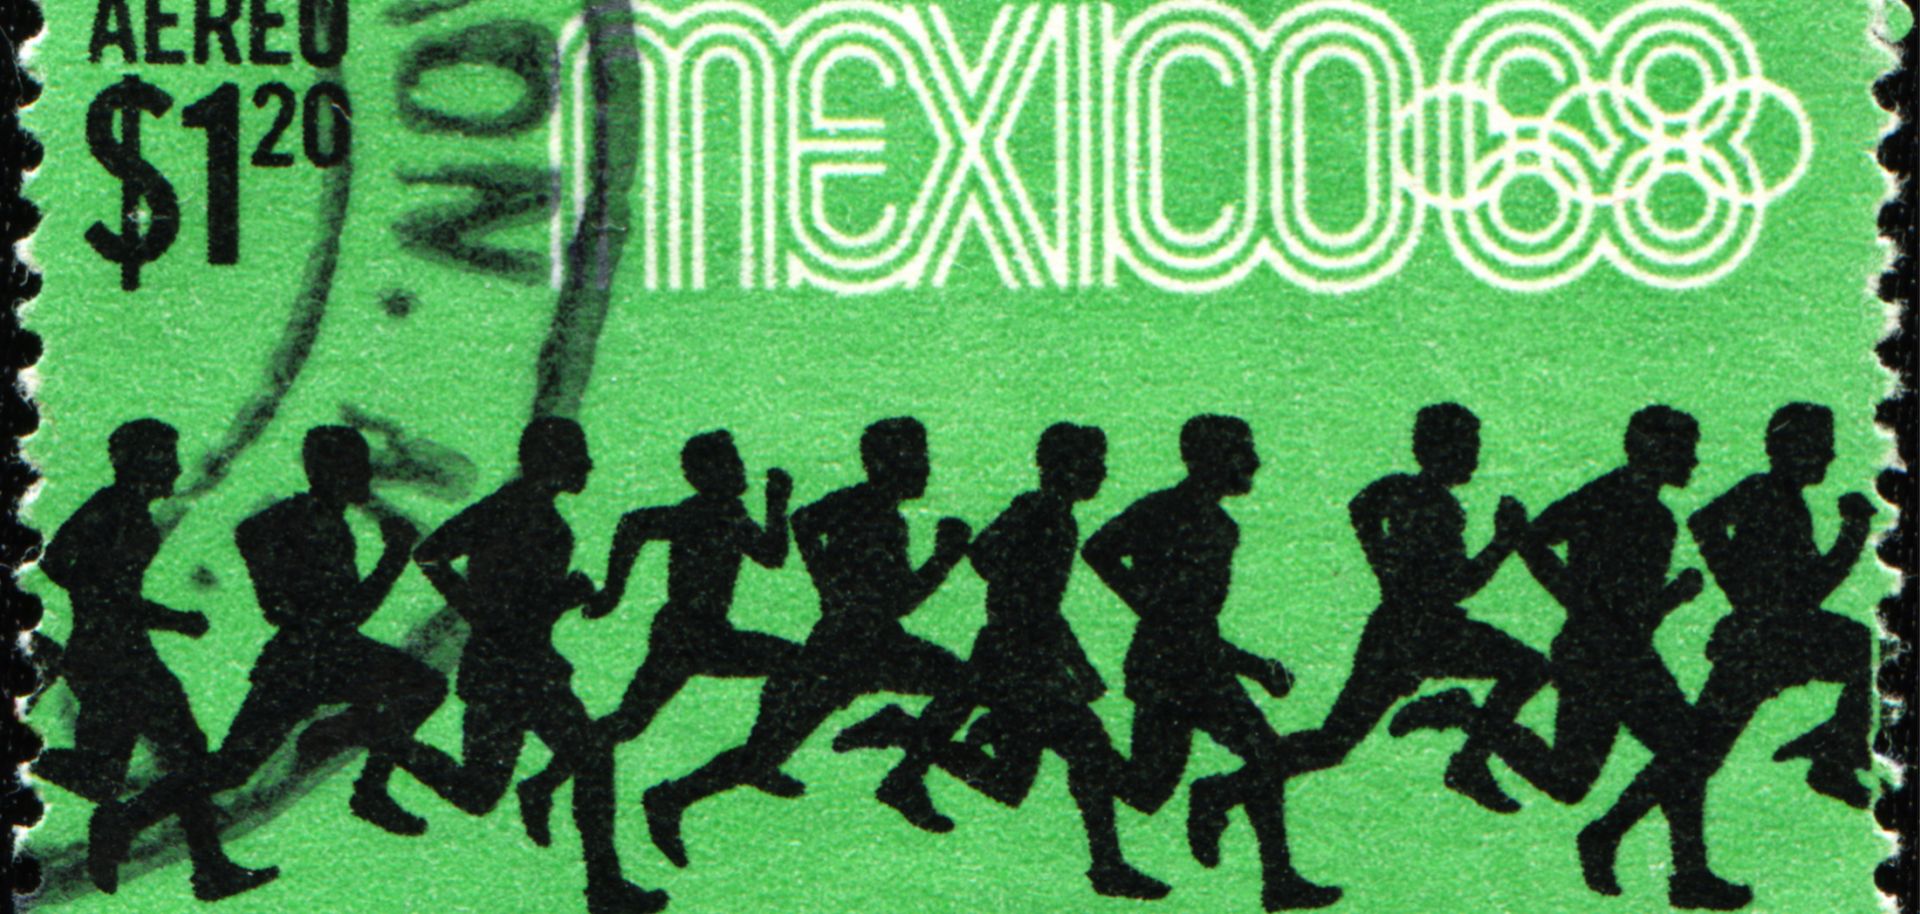 A massacre of students marred the legacy of the Mexico City Olympic Games held in 1968.